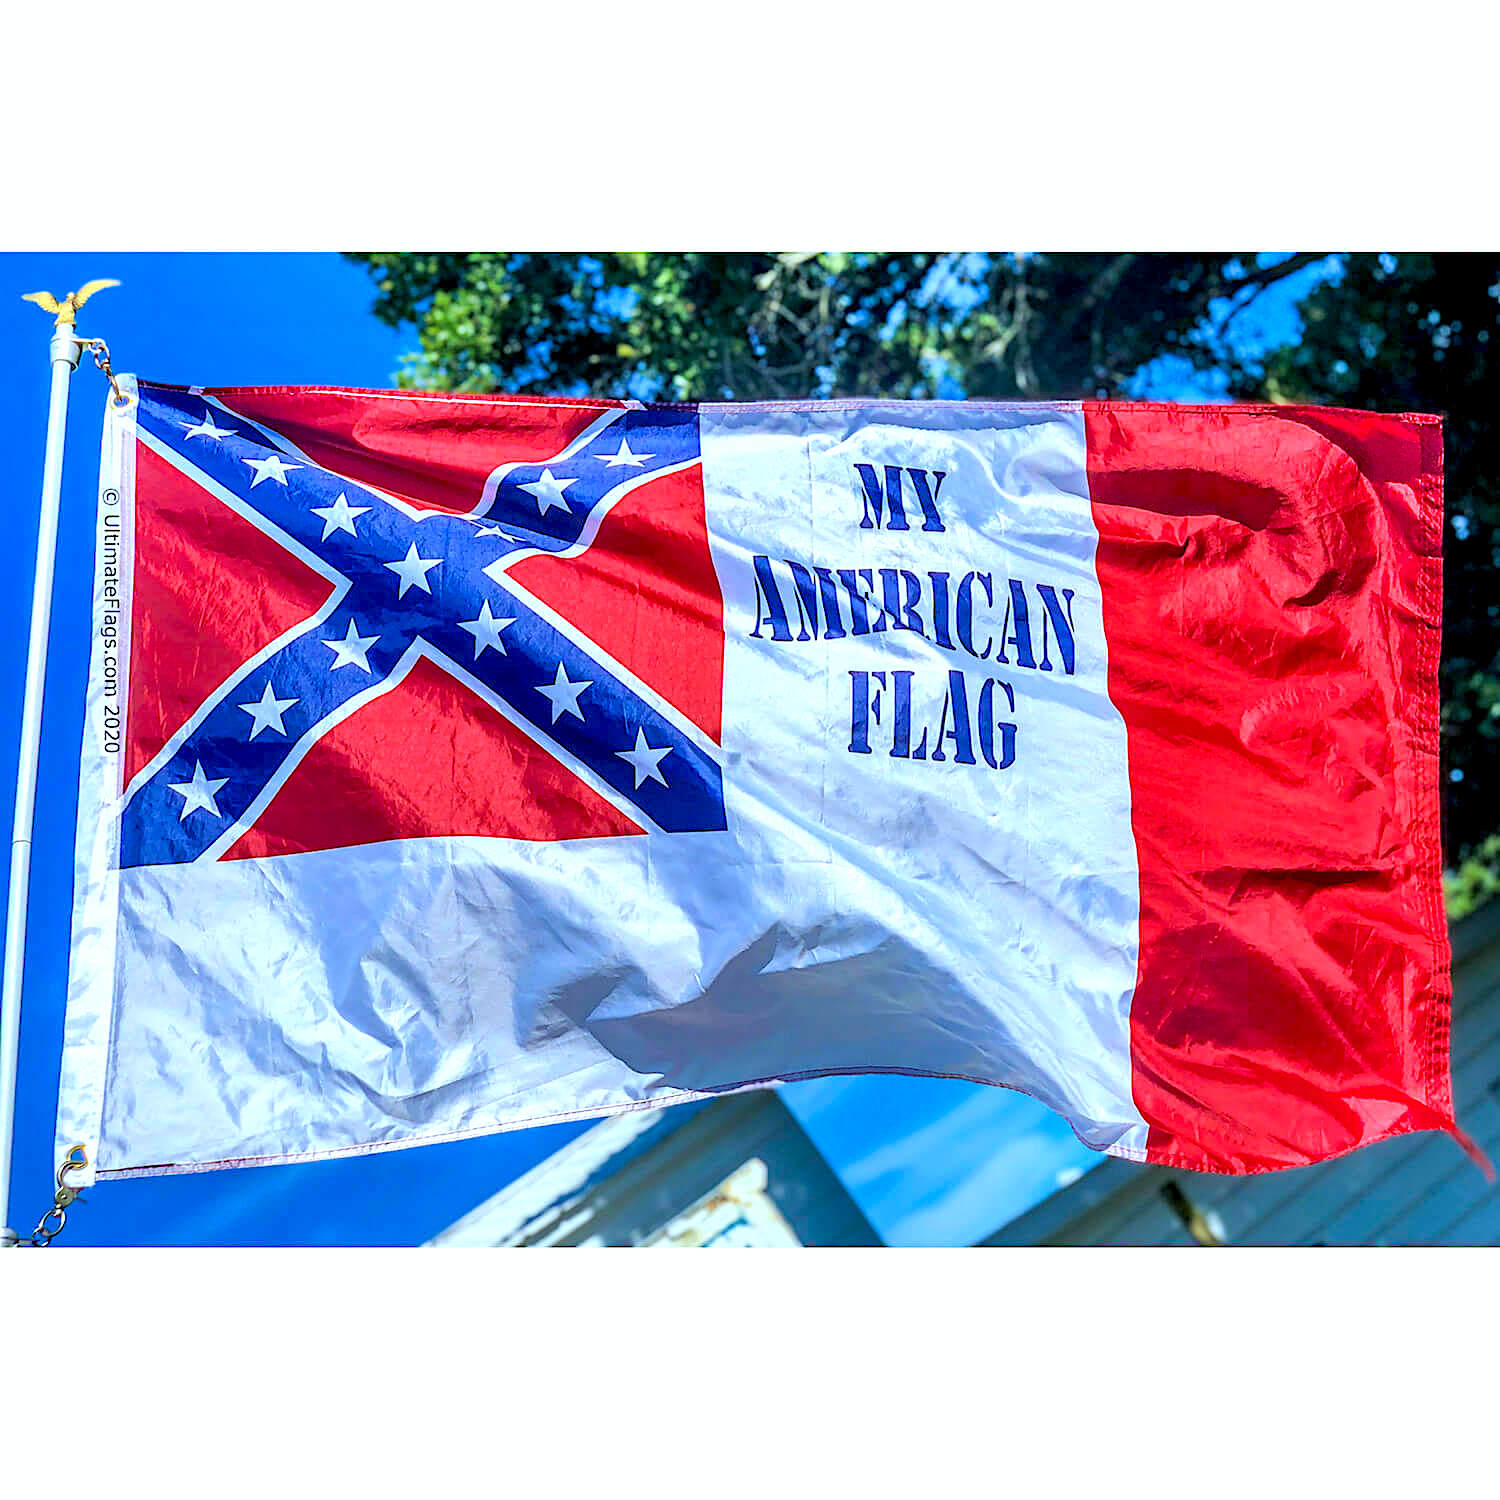 Explore America’s Heritage with Ultimate Flags Inc